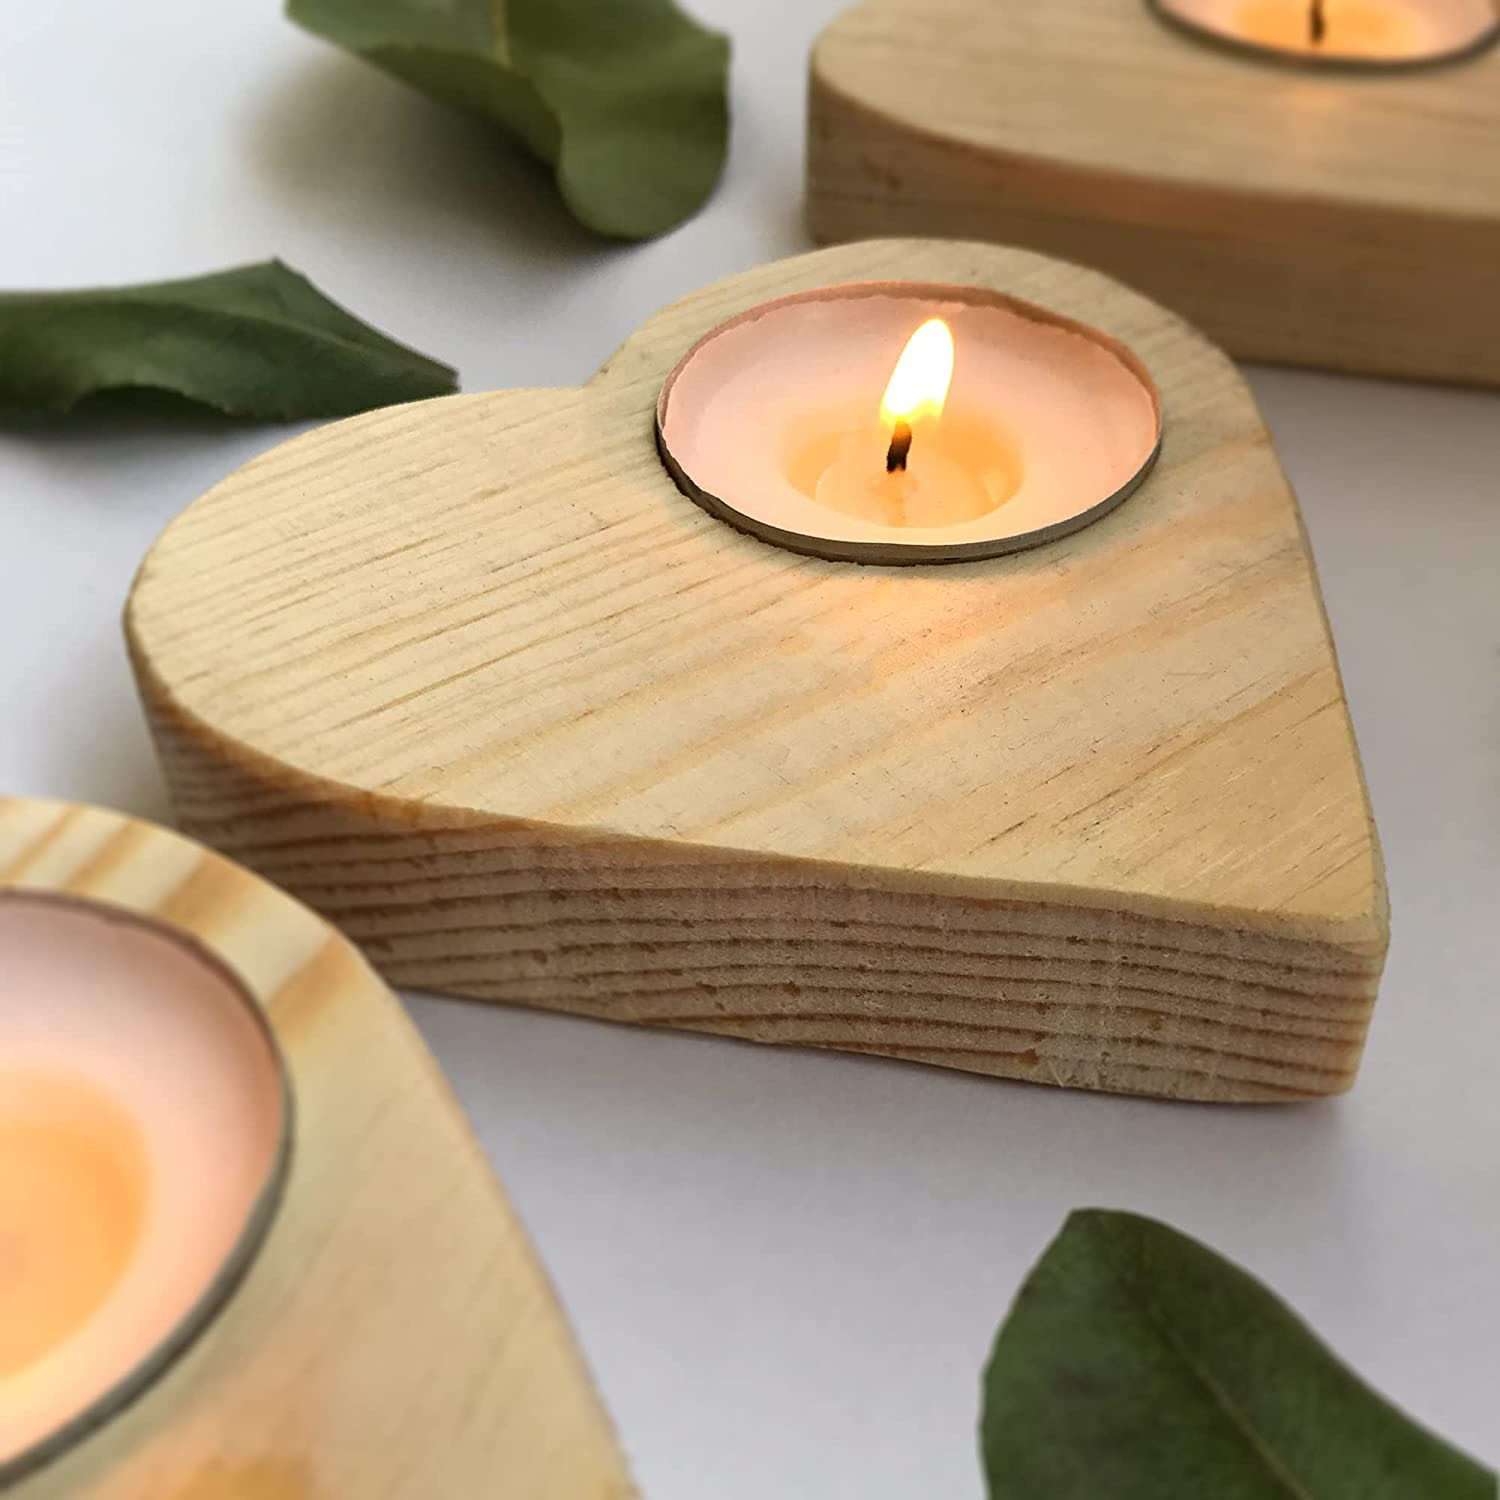 Tea Light Candle Holders – Pack of 6 Wood Candle Holders – Centerpieces Tea Light Holders -Romantic Decor (White Candle)